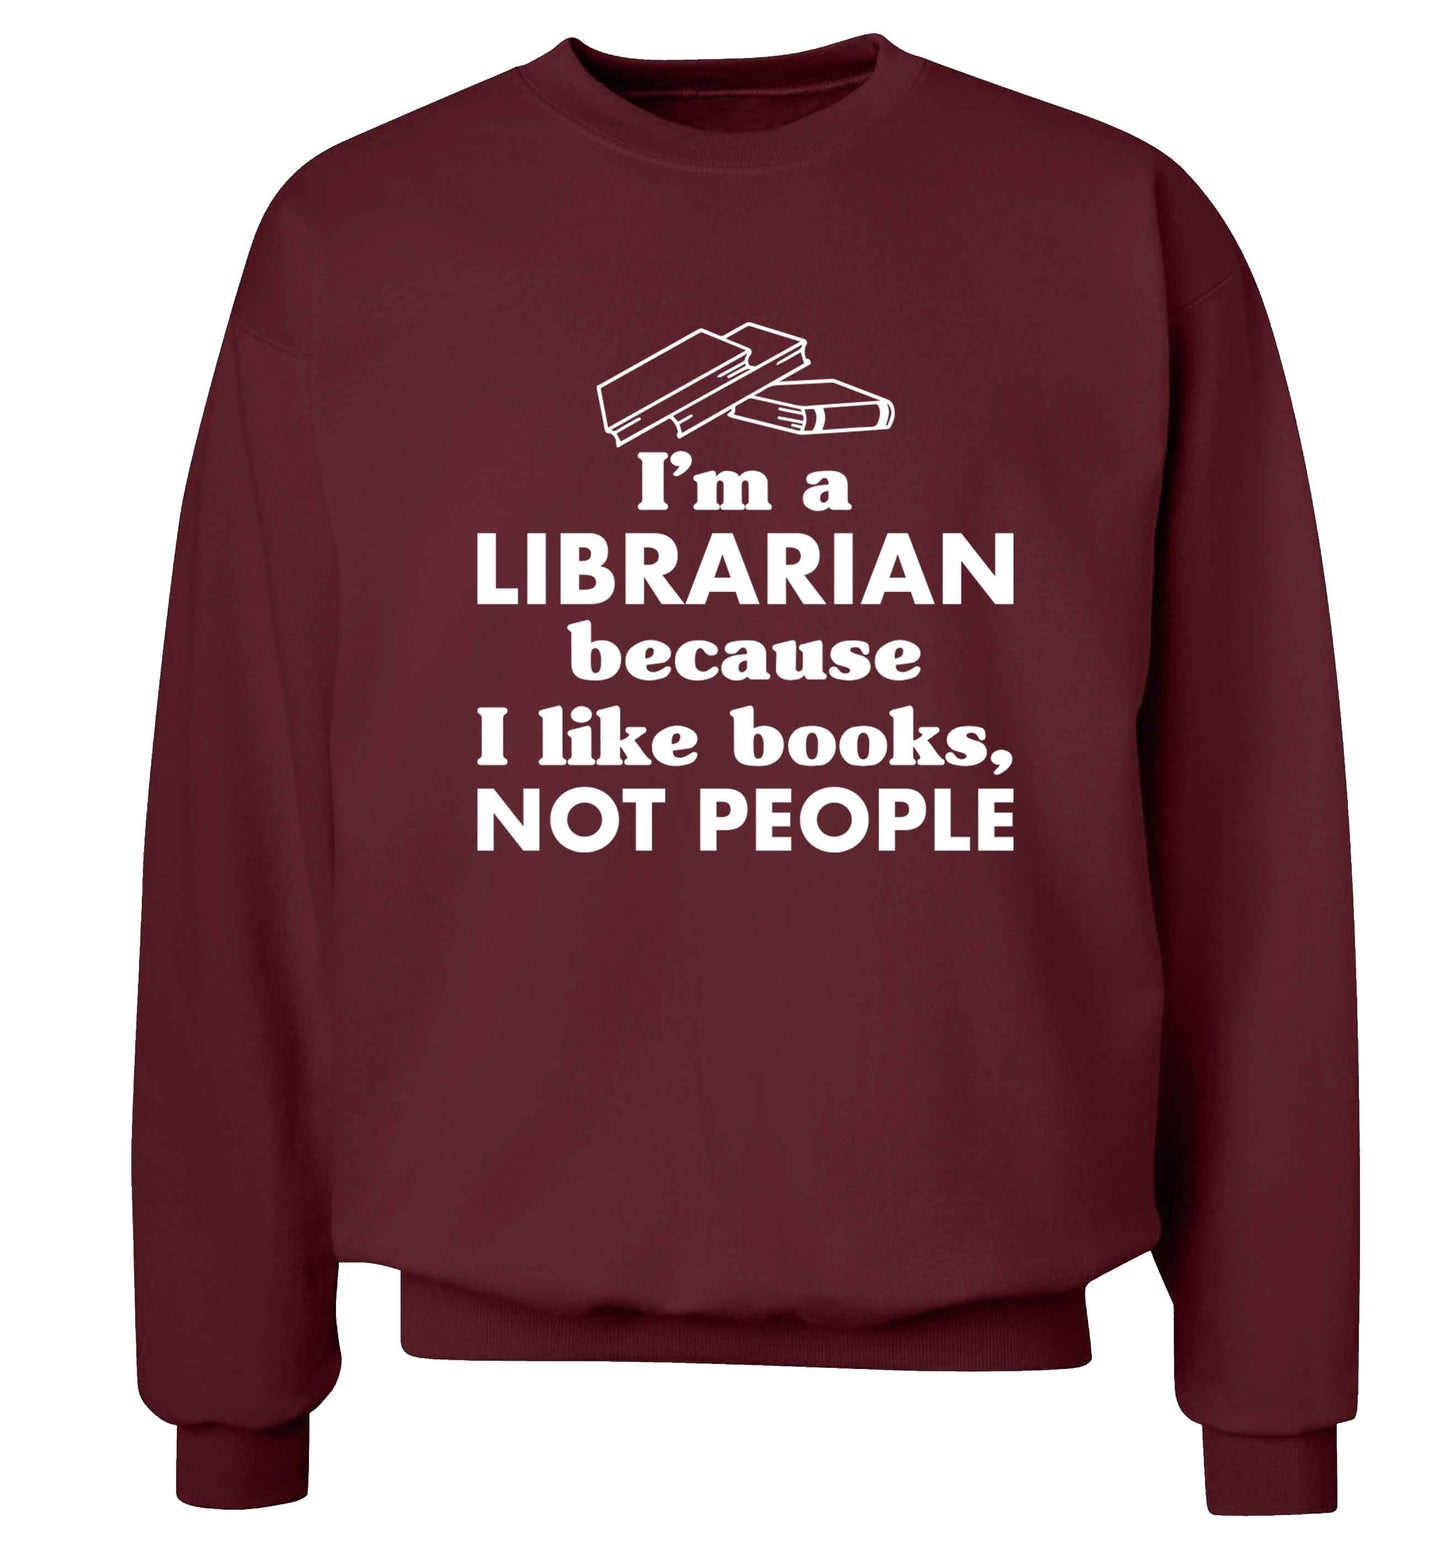 I'm a librarian because I like books not people Adult's unisex maroon Sweater 2XL